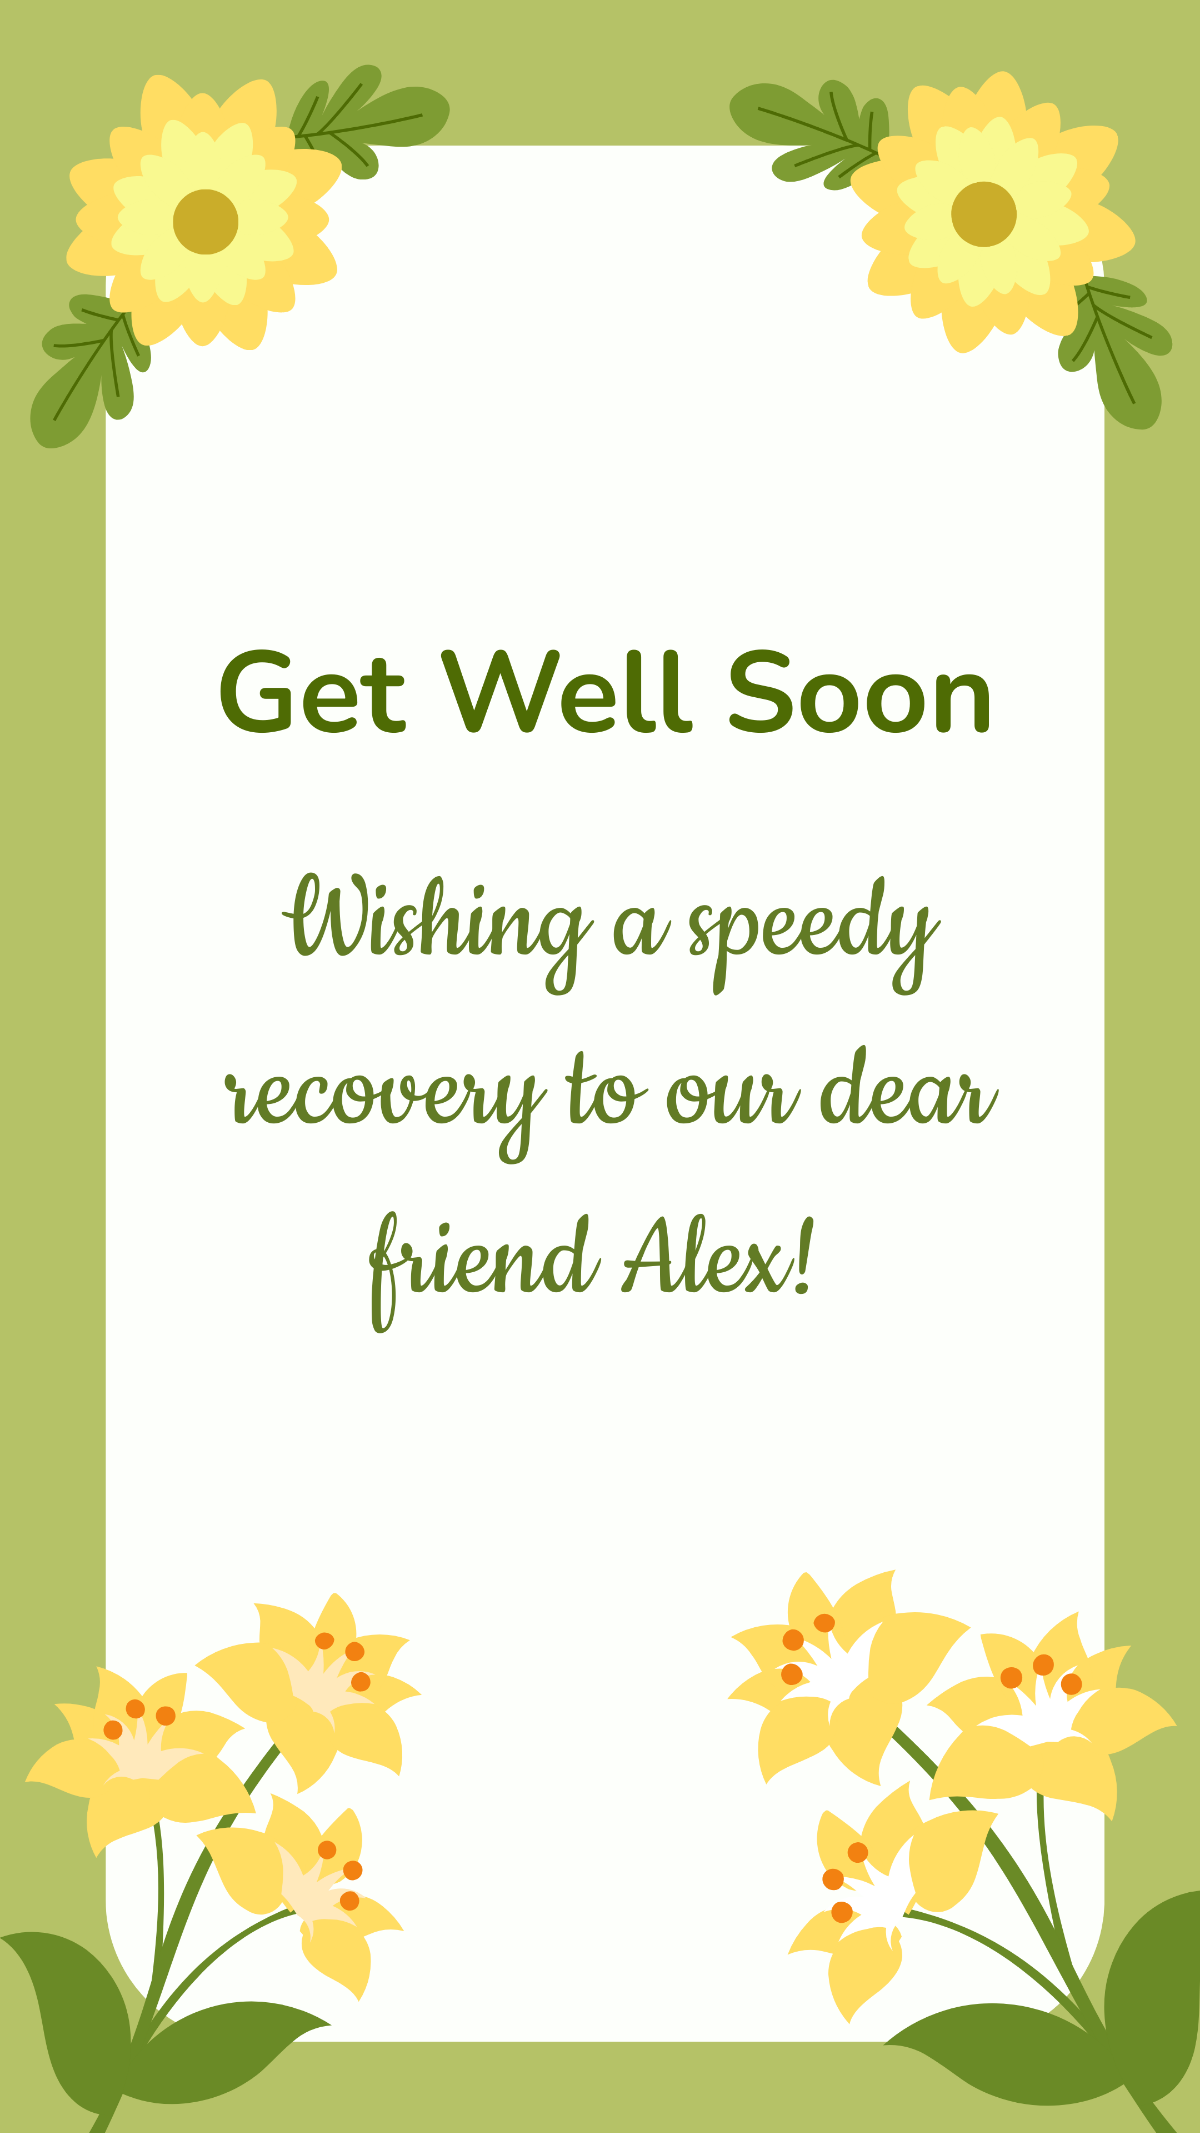 Get Well Soon Wishes Instagram Post Template